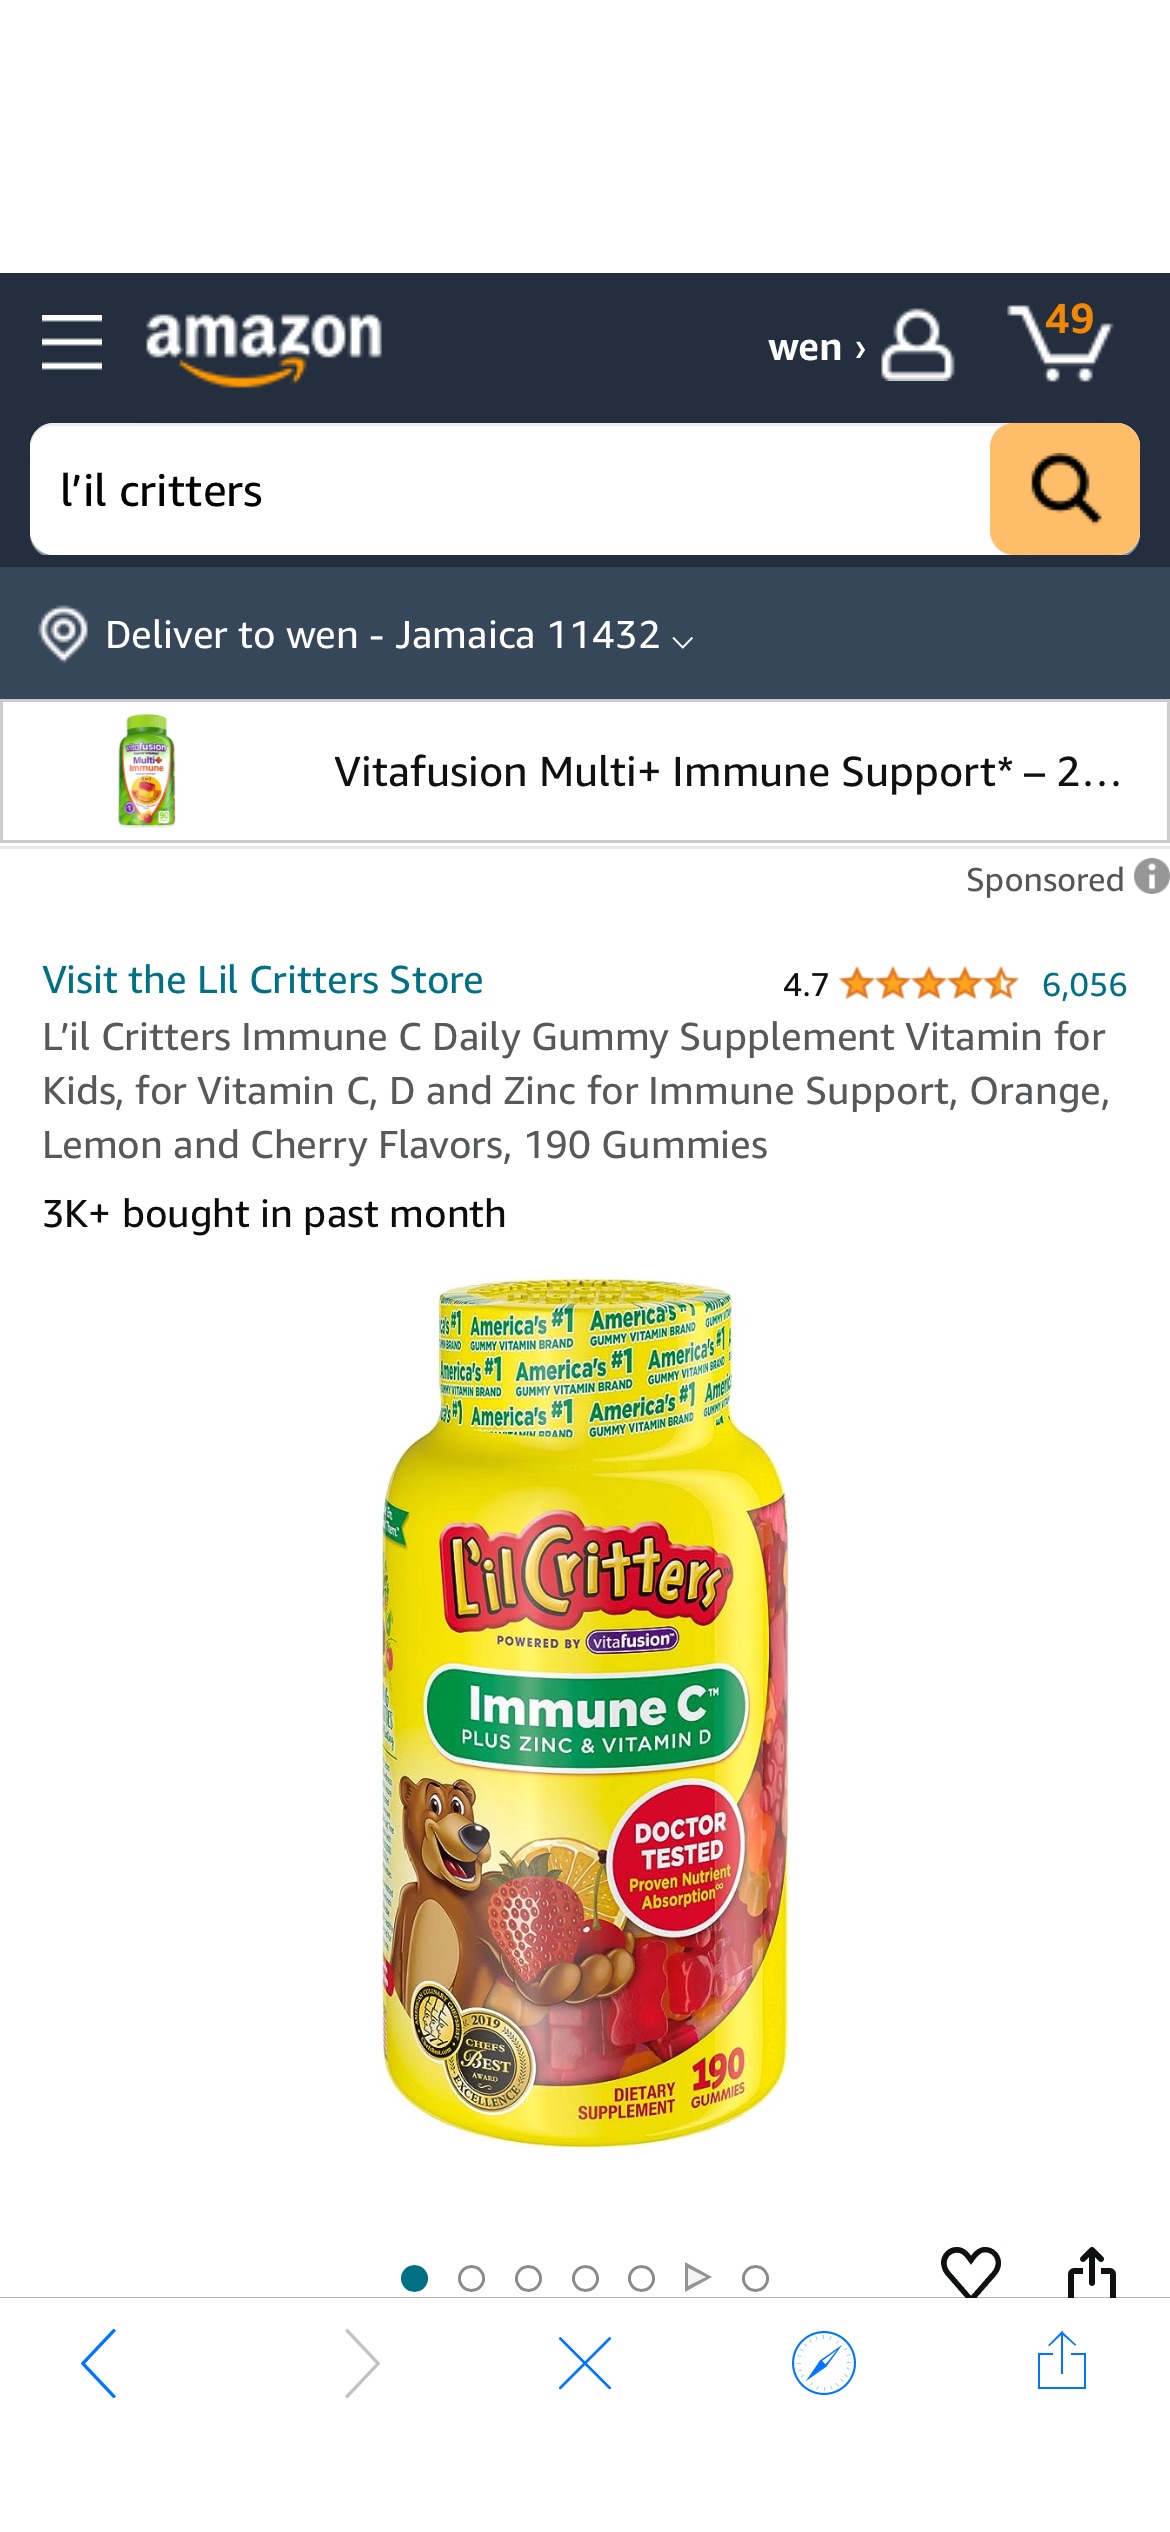 Amazon.com: L’il Critters Immune C Daily Gummy Supplement Vitamin for Kids, for Vitamin C, D and Zinc for Immune Support, Orange, Lemon and Cherry Flavors, 190 Gummies : Health & Household